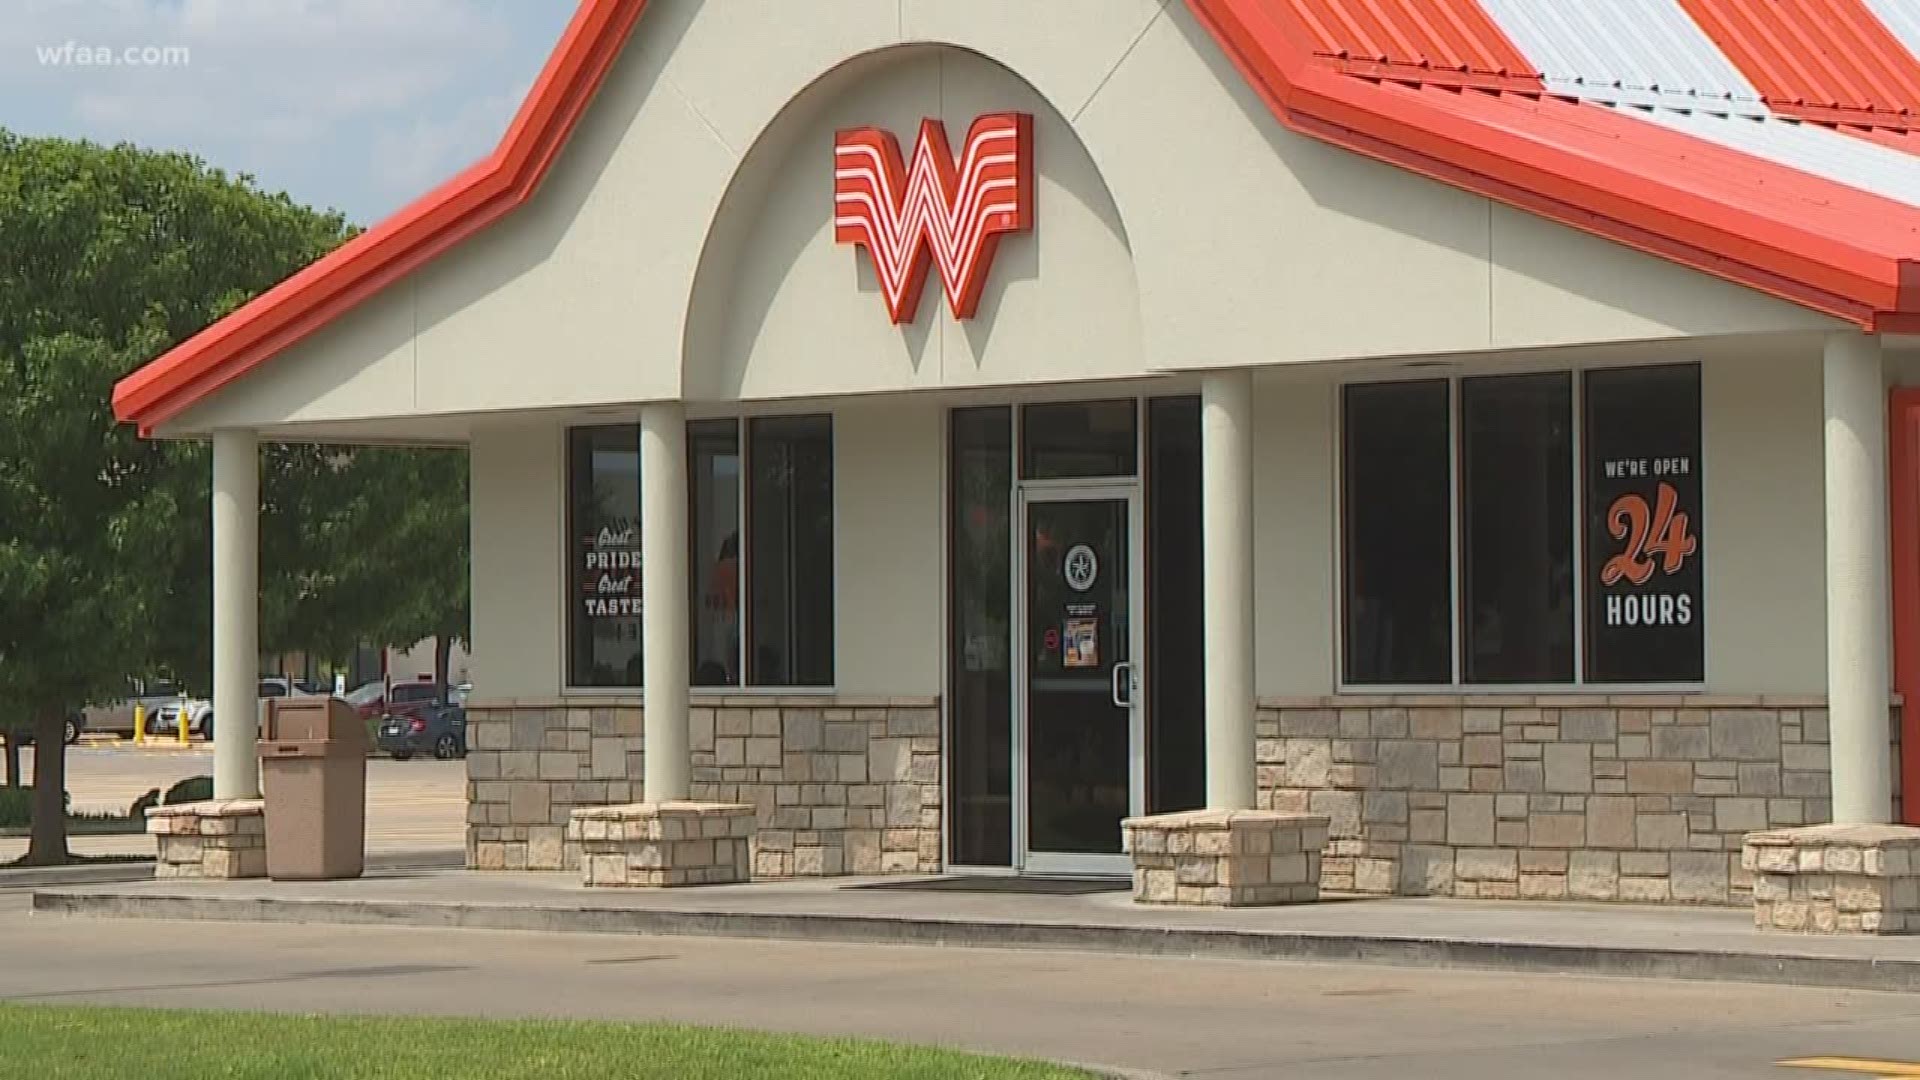 DFW Airport could soon serve Whataburger